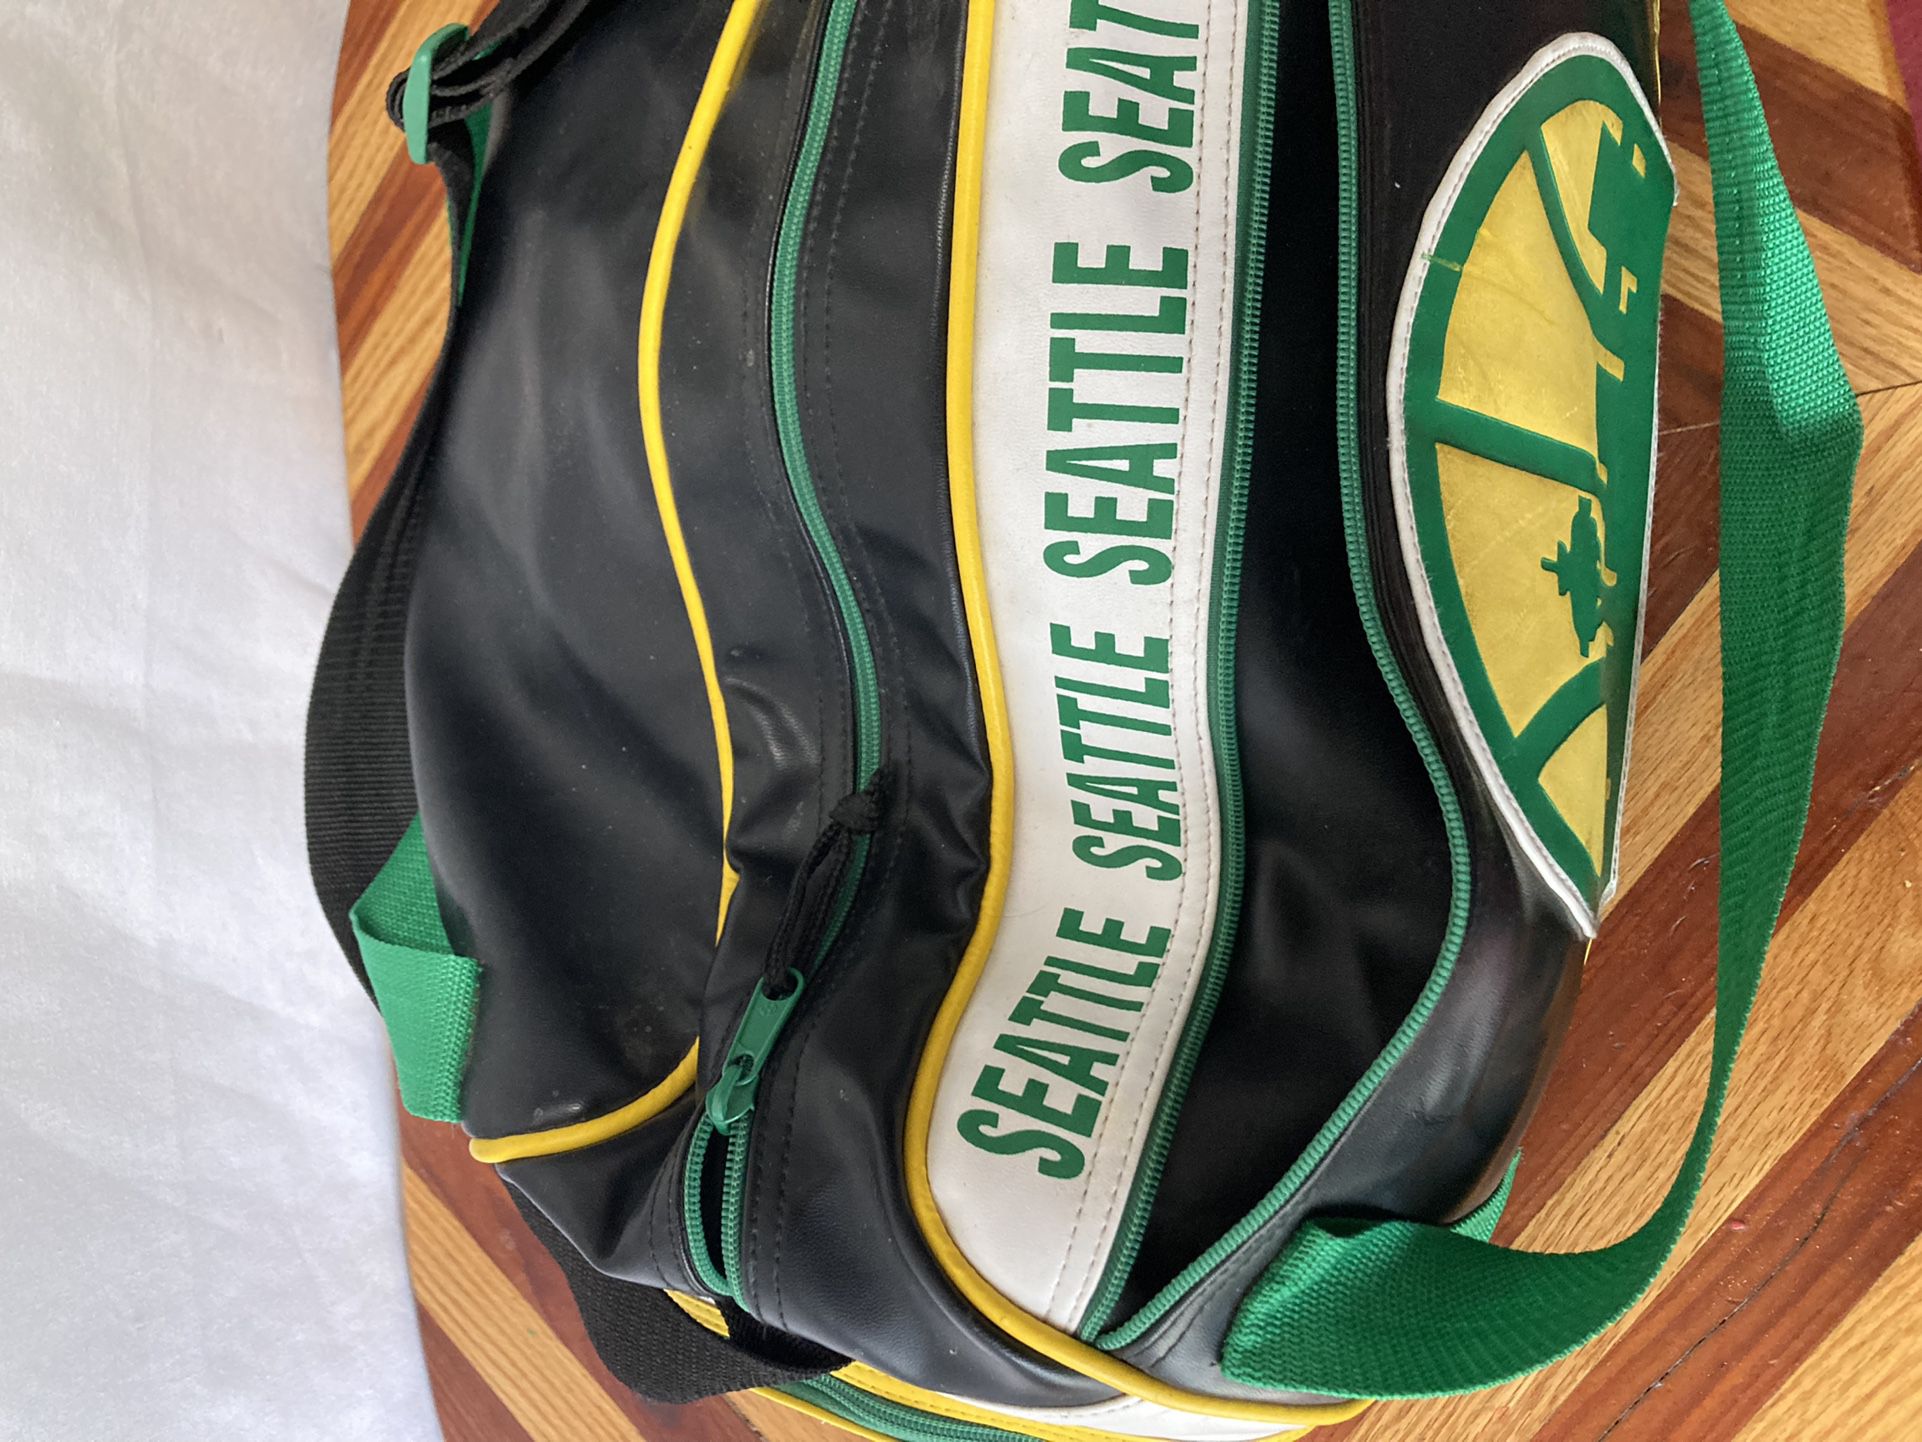 VTG 80s SEATTLE SUPERSONICS NBA Player Issue Bag Leather Duffle Bag Basketball